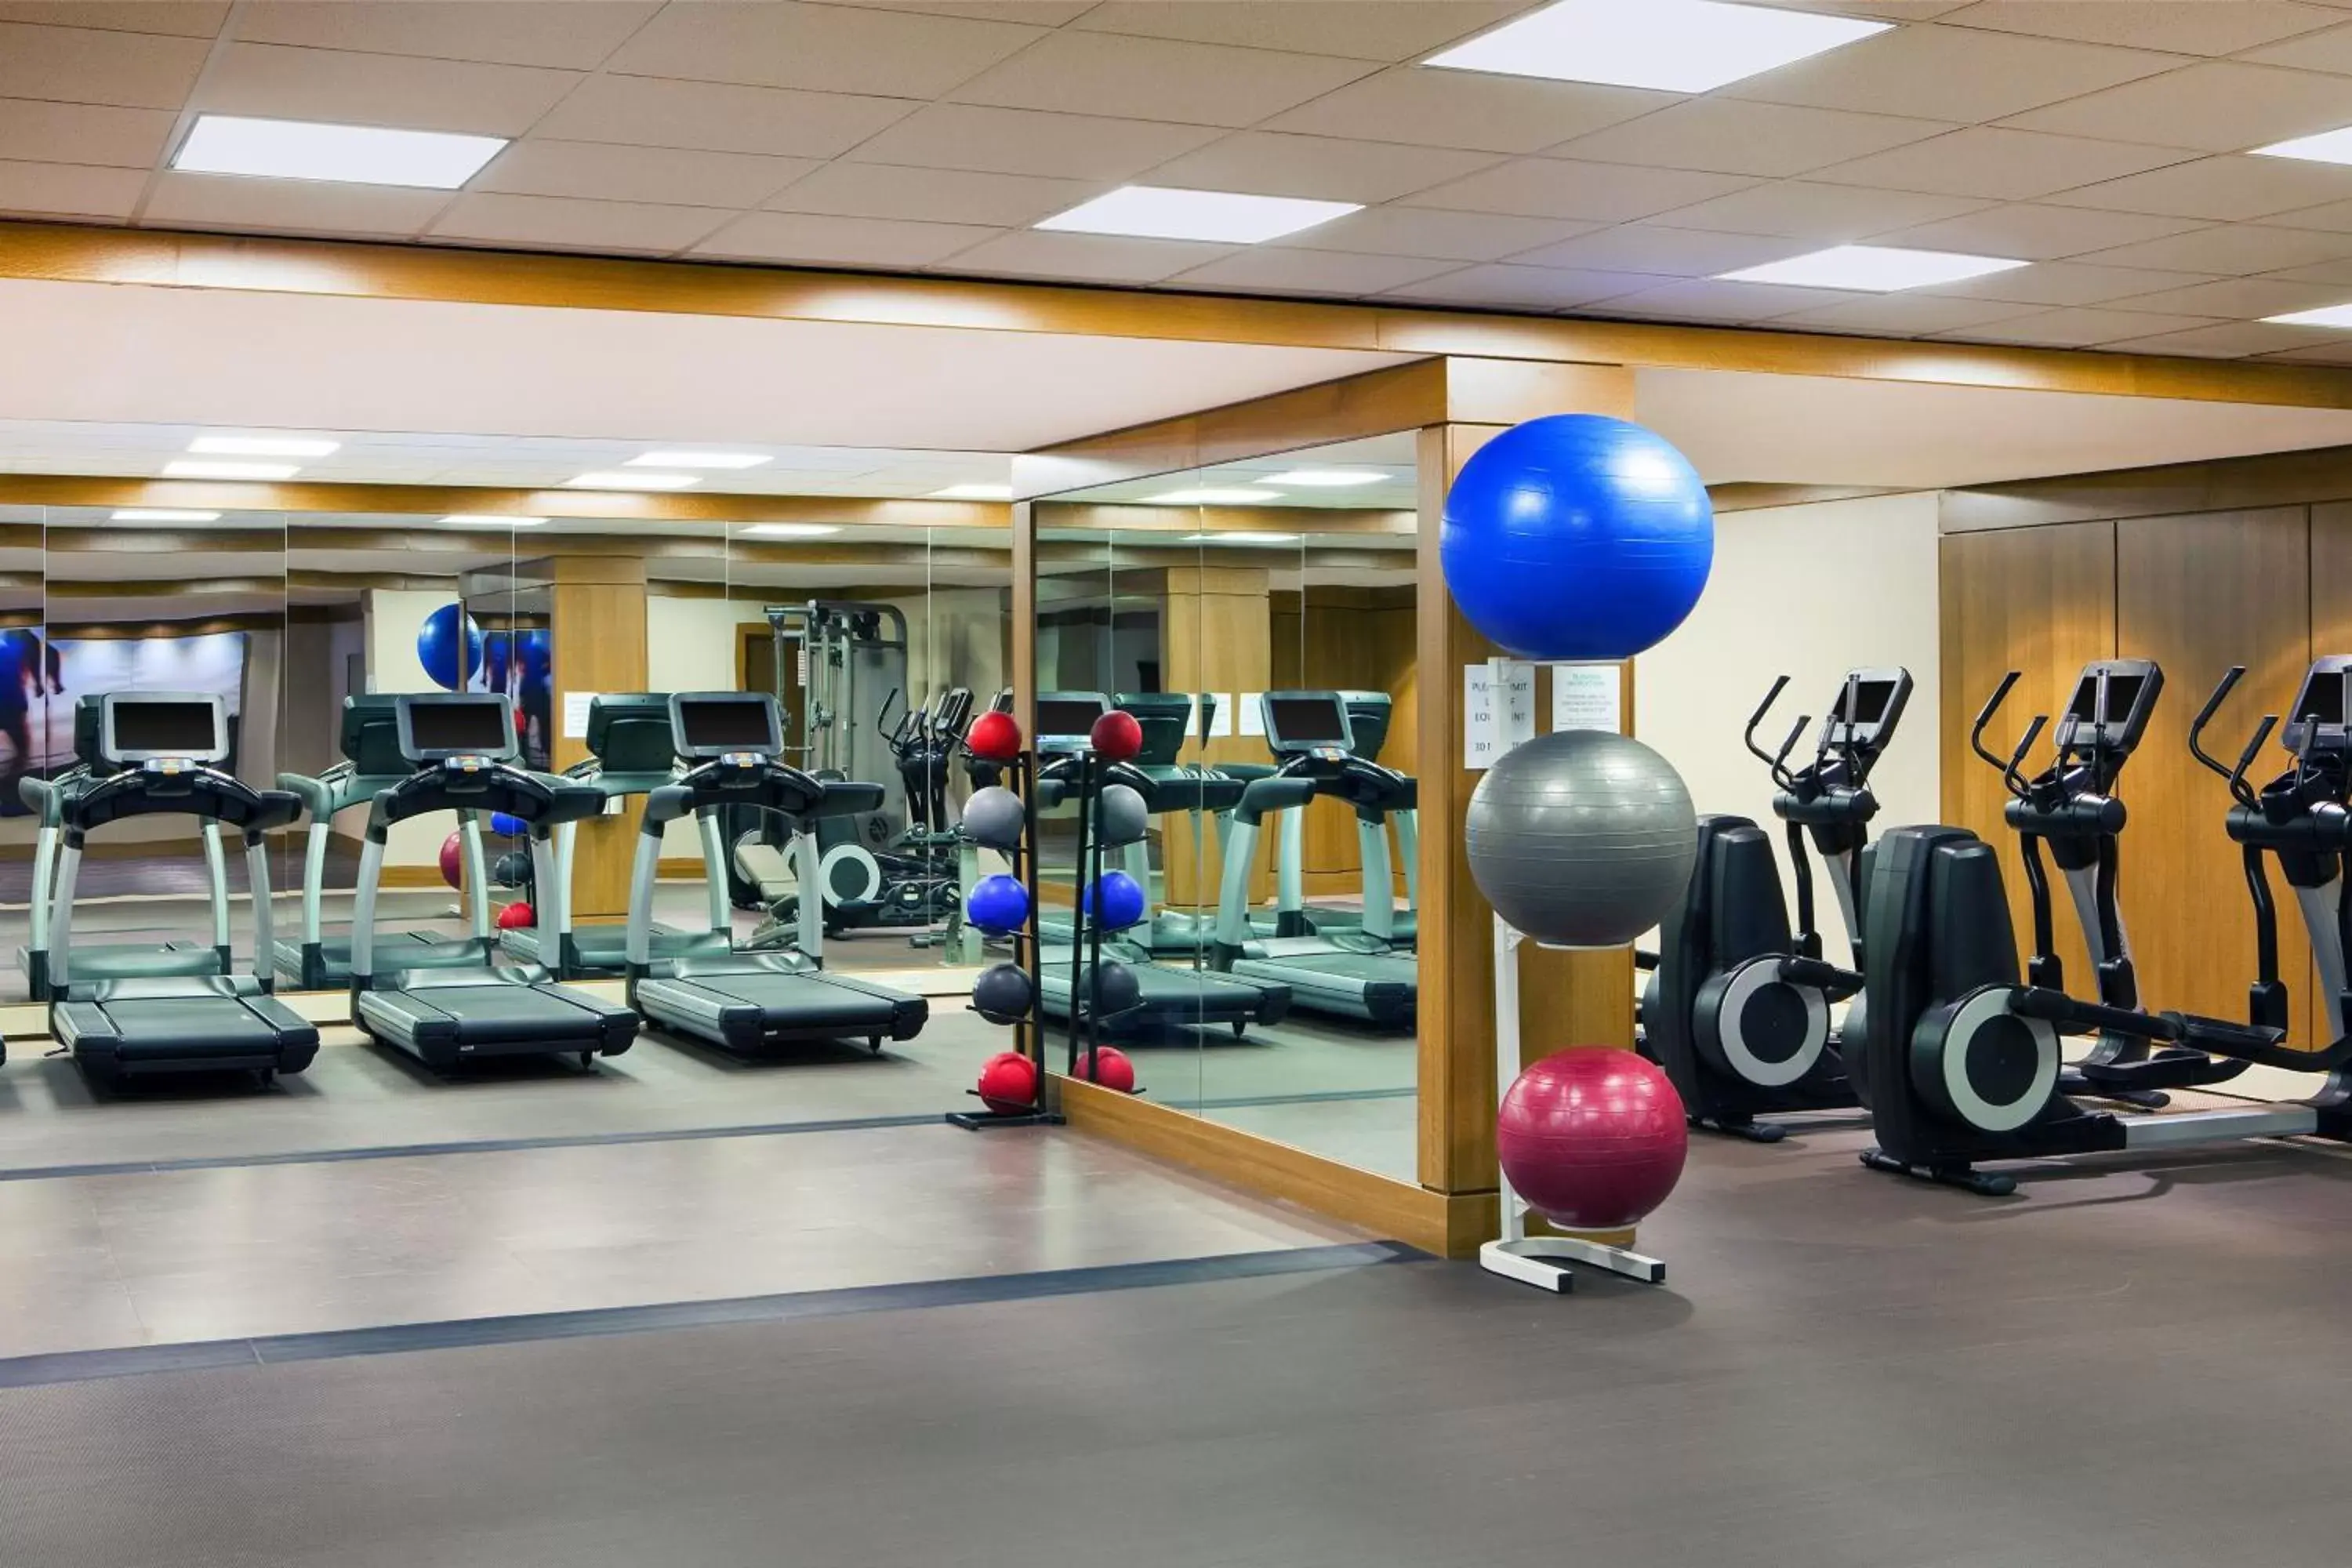 Fitness centre/facilities, Fitness Center/Facilities in The Westin Portland Harborview